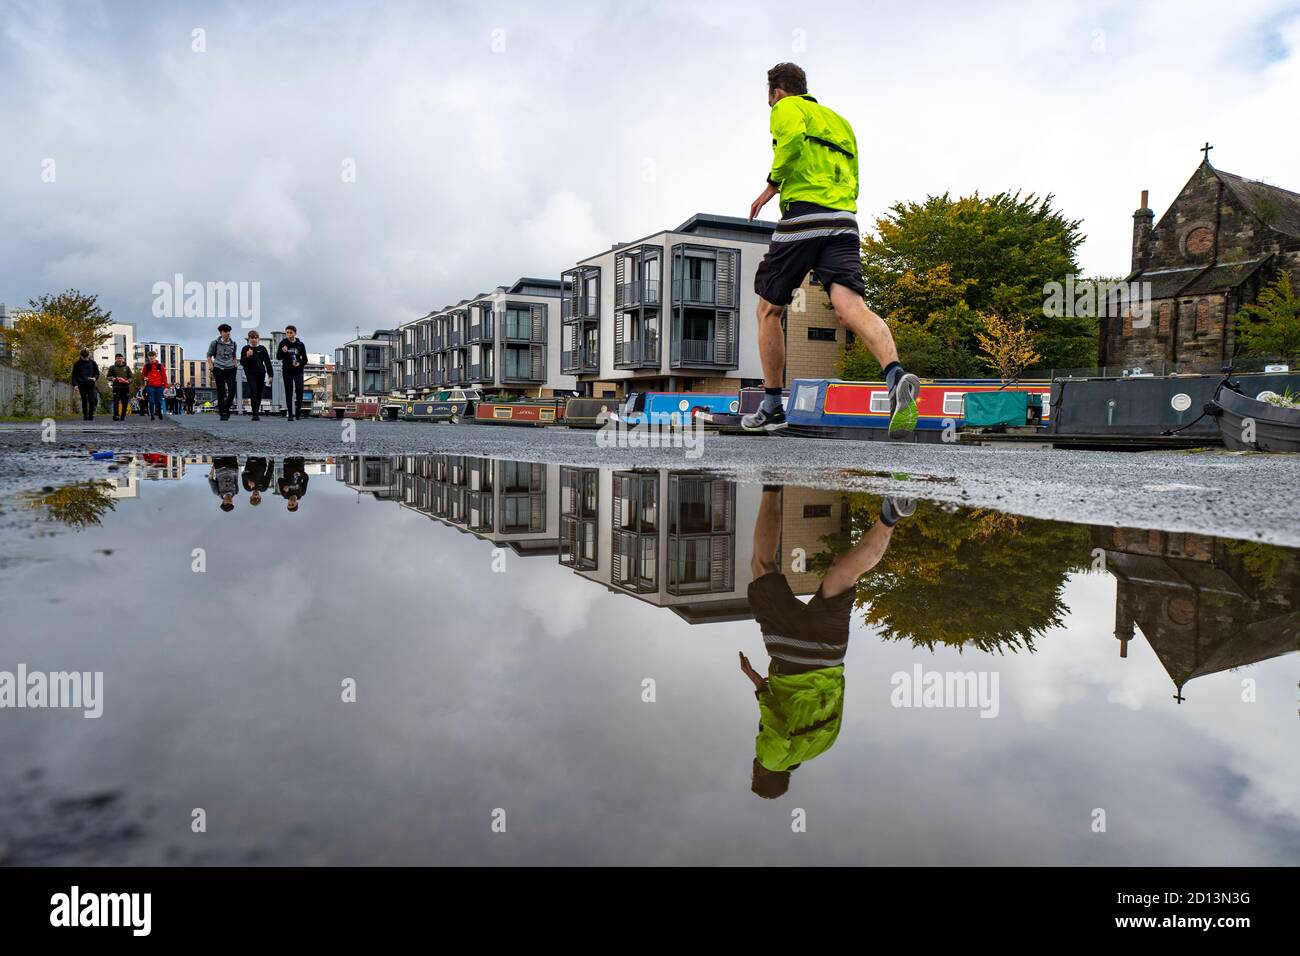 Edinburgh, Scotland, UK. 5 October, 2020. After a weekend of heavy rain from Storm Alex , members of the public were out on the towpath of the Union Canal at Fountainbridge today enjoying some dry, calm weather. Pictured; People exercising beside the Union Canal.  Iain Masterton/Alamy Live News Stock Photo